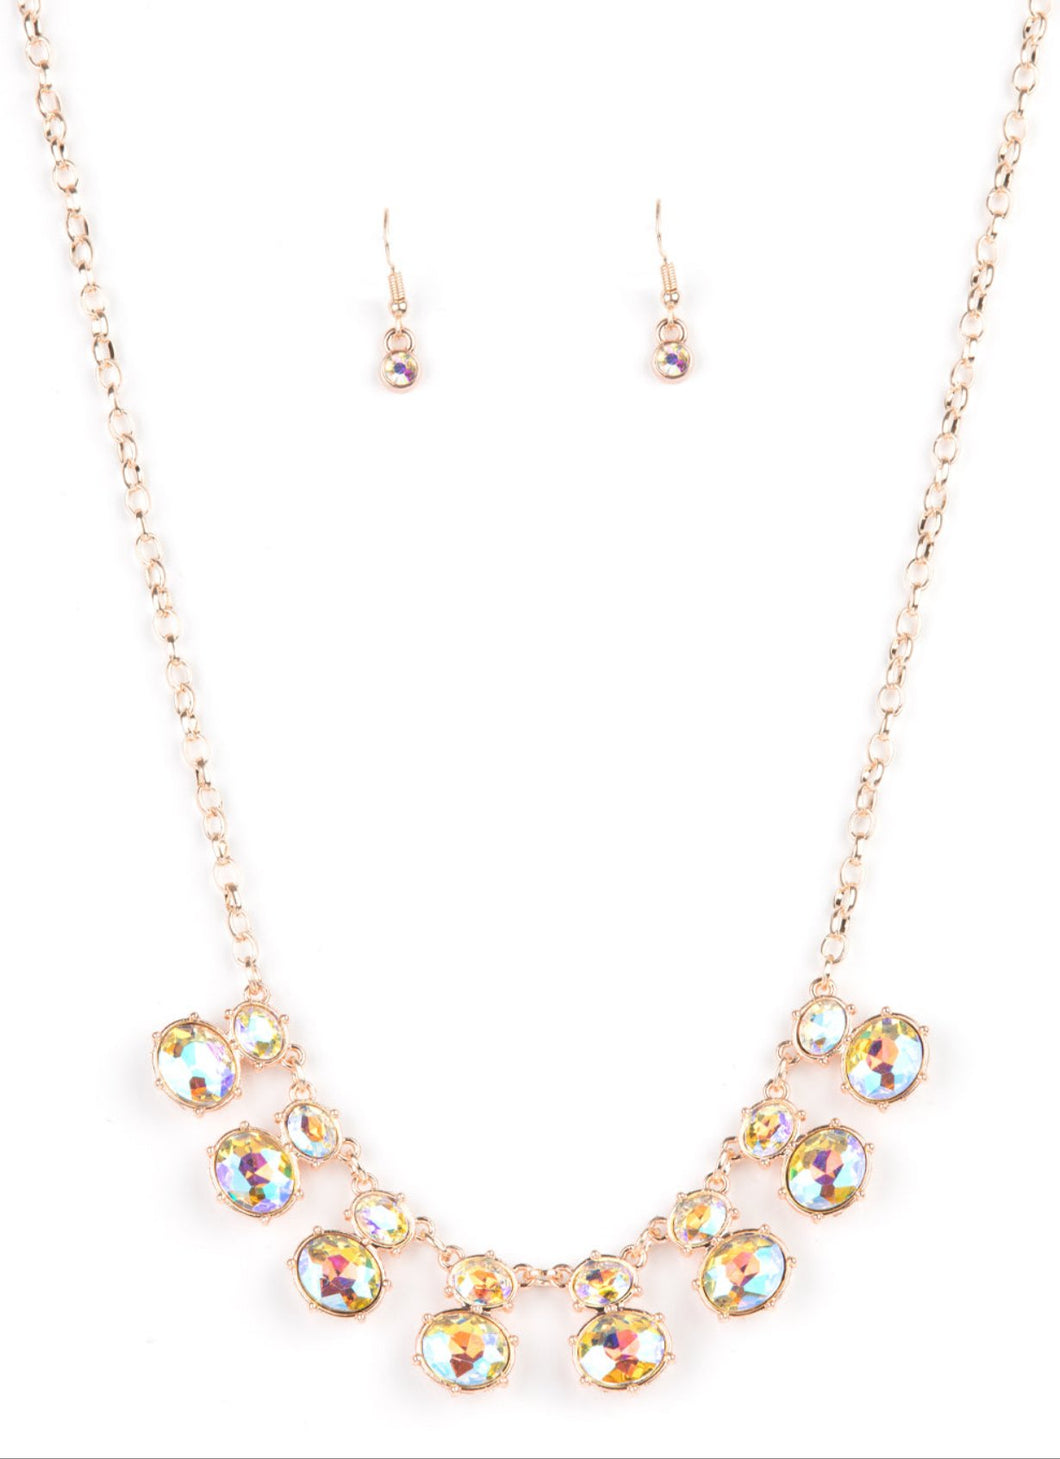 Whimsical Bliss Necklace and Earrings